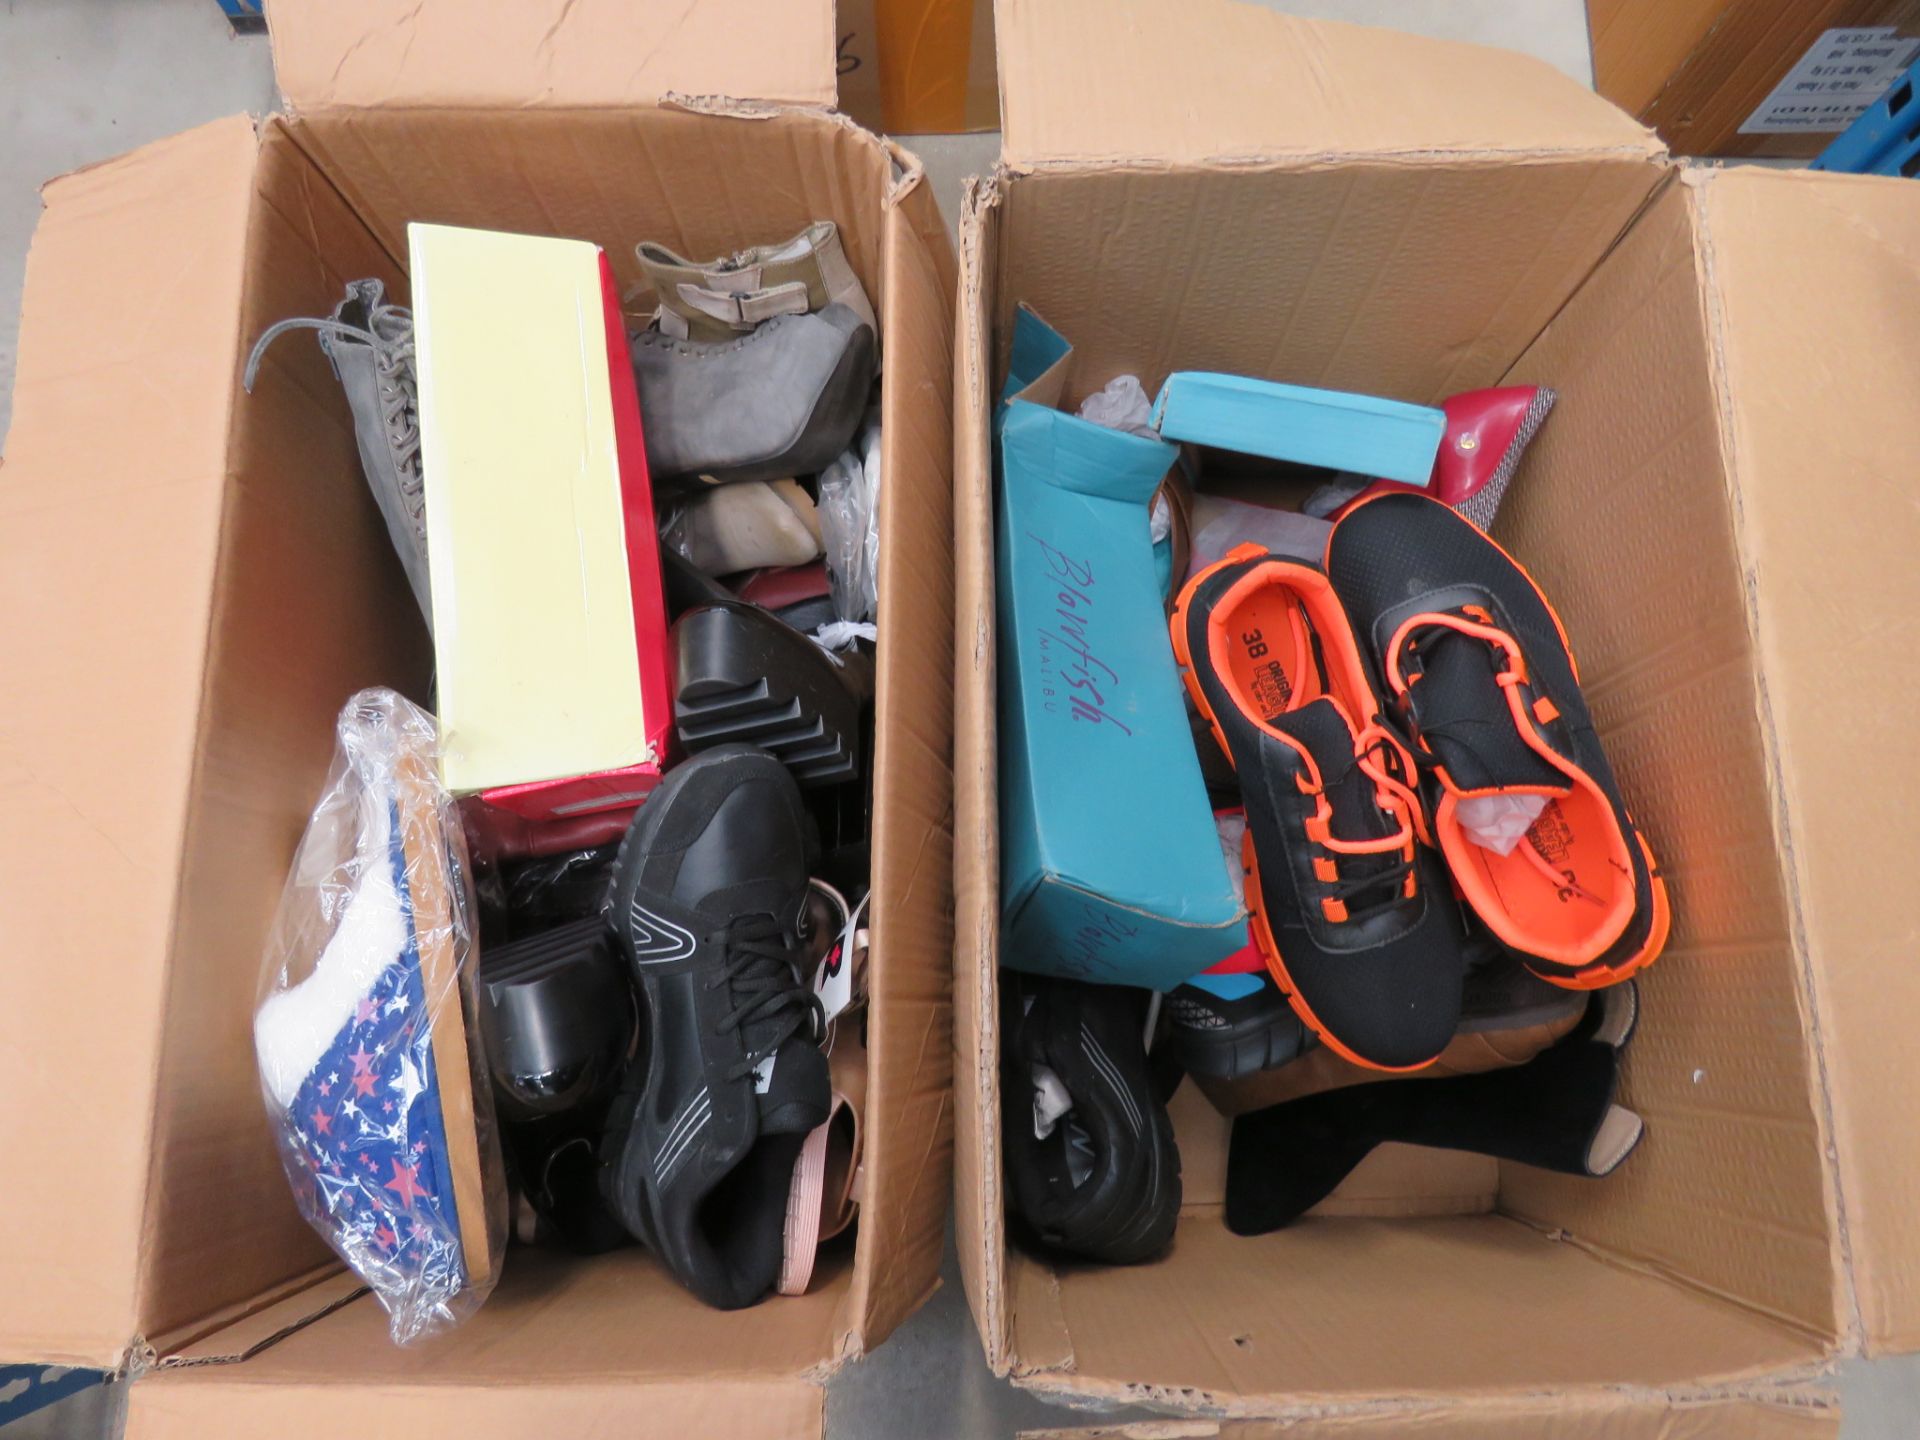 Box containing mixed shoes, slippers, children's shoes, etc